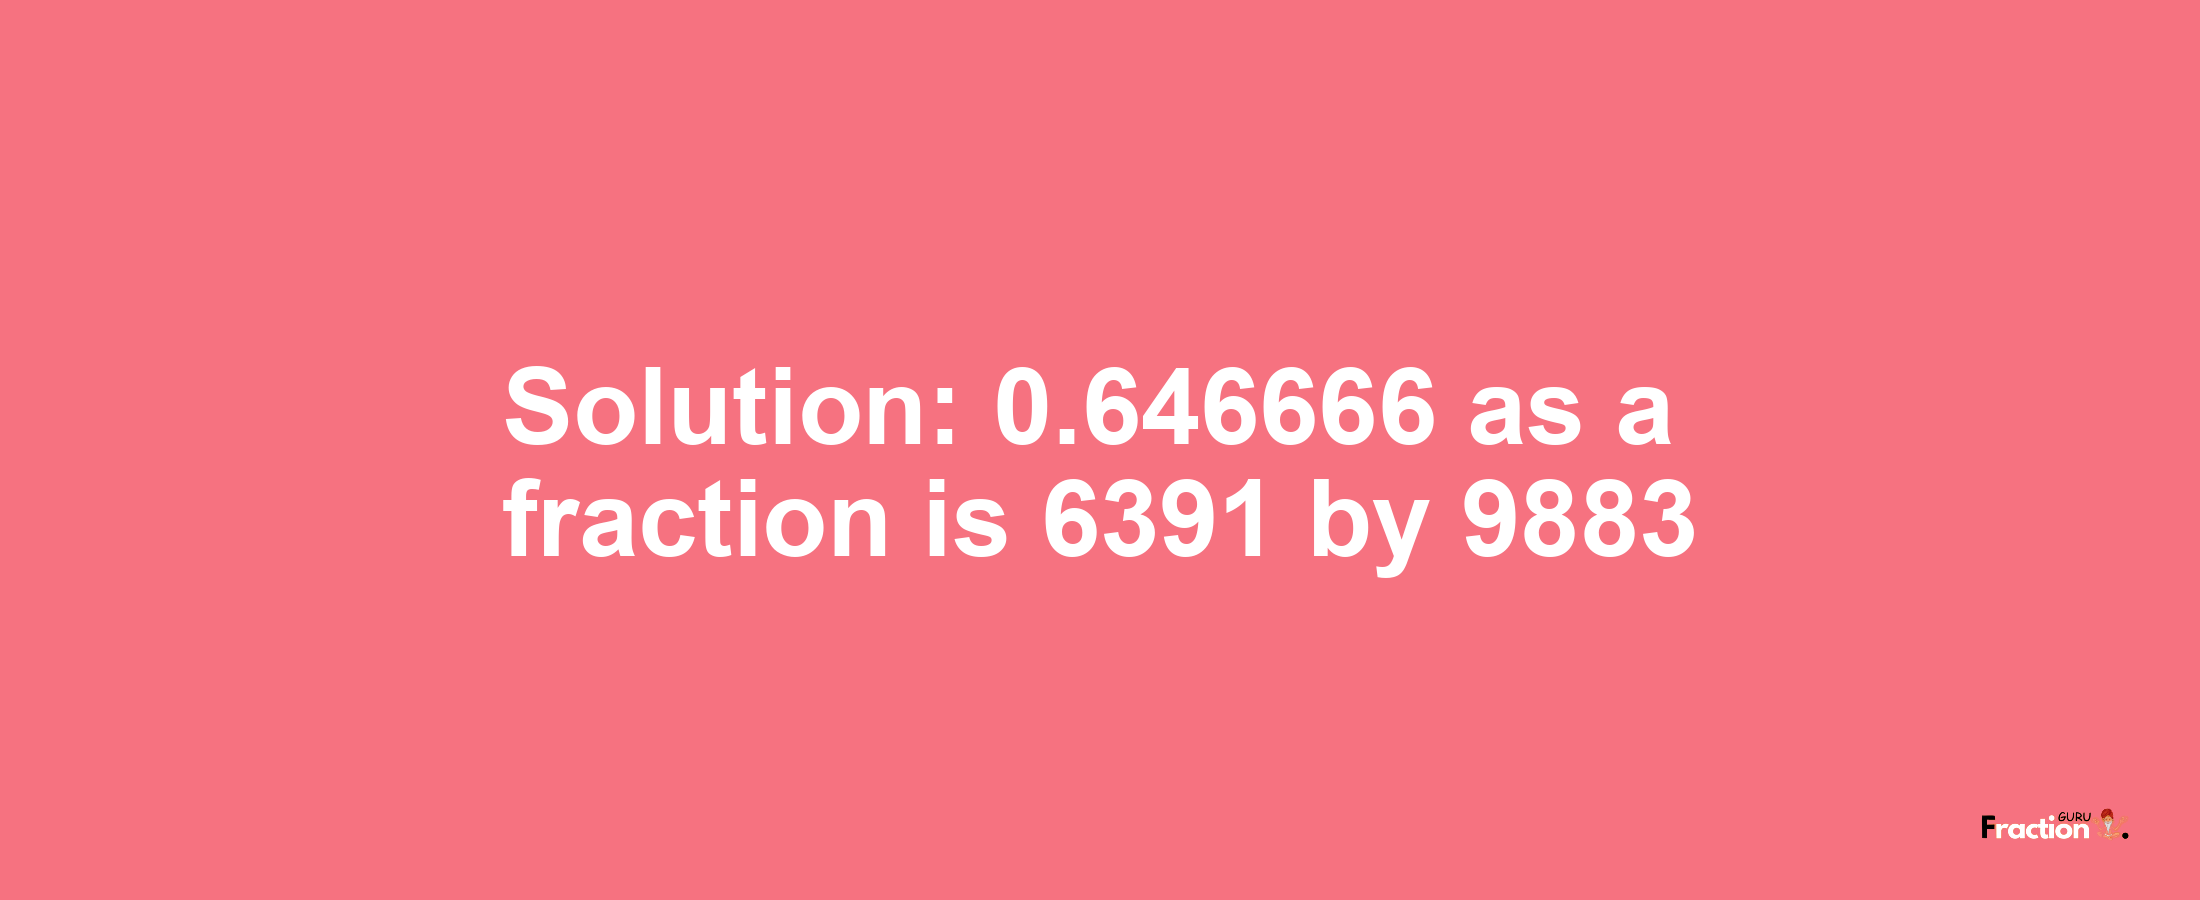 Solution:0.646666 as a fraction is 6391/9883